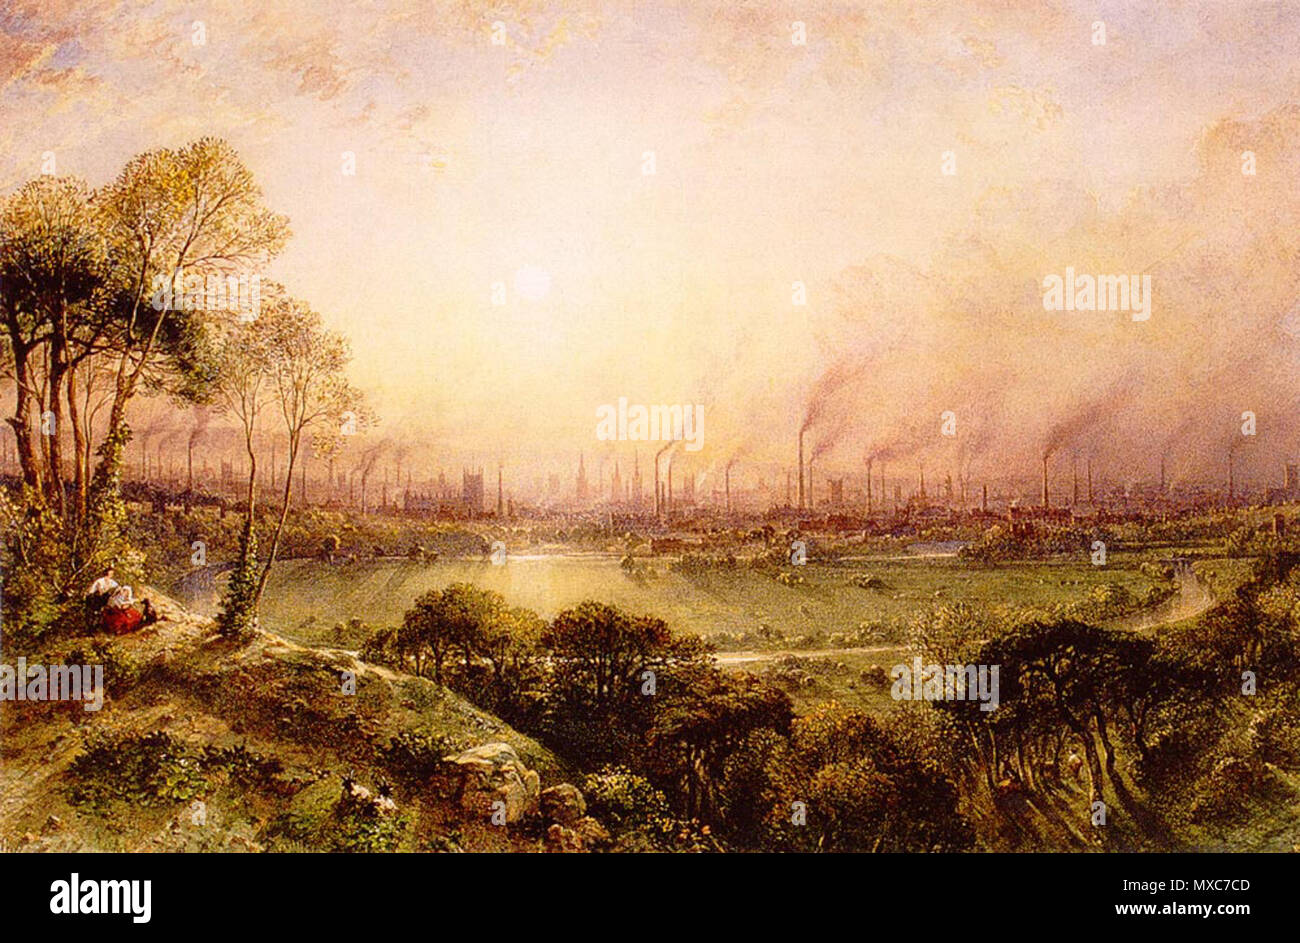 . Manchester from Kersal Moor .  English: Later rendered as an engraving entitled Cottonopolis by Edward Goodall . 1852.    William Wyld  (1806–1889)     Alternative names Wyld  Description British painter  Date of birth/death 17 January 1806 25 December 1889  Location of birth/death Greater London Paris  Work location Paris  Authority control  : Q3569042 VIAF: 66477082 ISNI: 0000 0000 6641 9868 ULAN: 500018763 LCCN: n85221375 NLA: 35803082 WorldCat 390 Manchester from Kersal Moor William Wylde (1857) Stock Photo